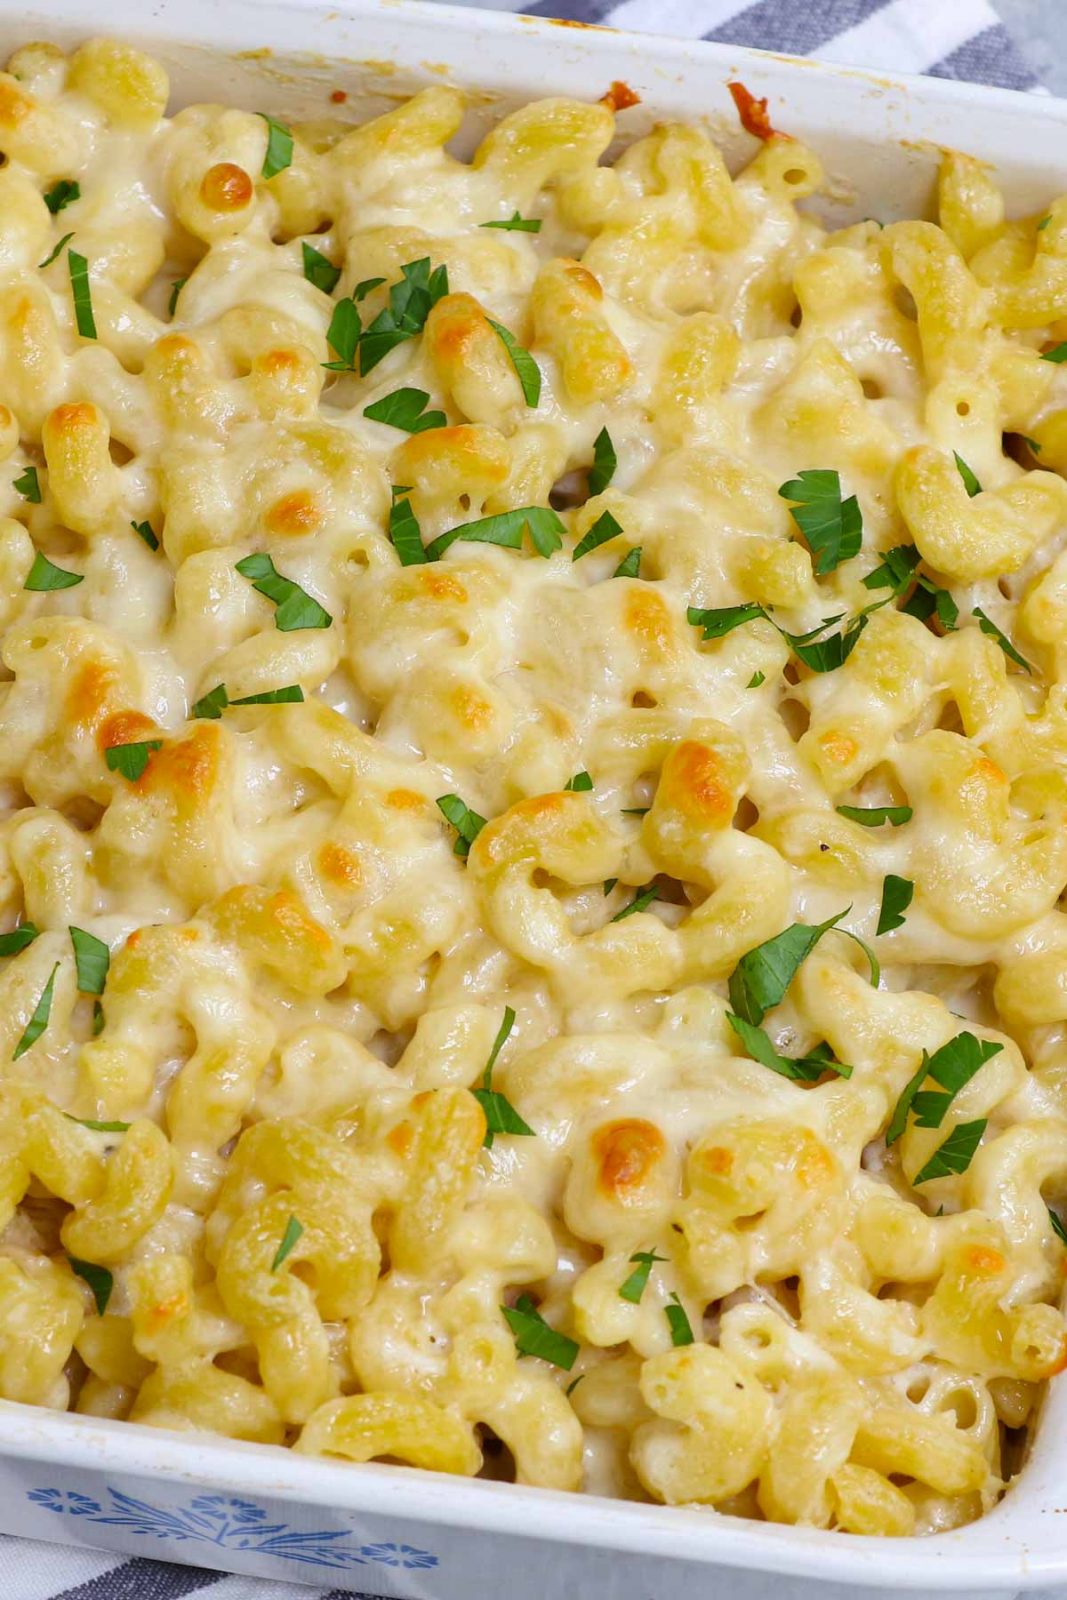 Looking for an easy and impressive pasta dish? Look no further than this creamy and cheesy Corkscrew Pasta with Cream Sauce. It’s delicious on its own or served as a side at your next family dinner. What’s more, this dish can be made ahead of time and reheated for a quick and easy weekday lunch.